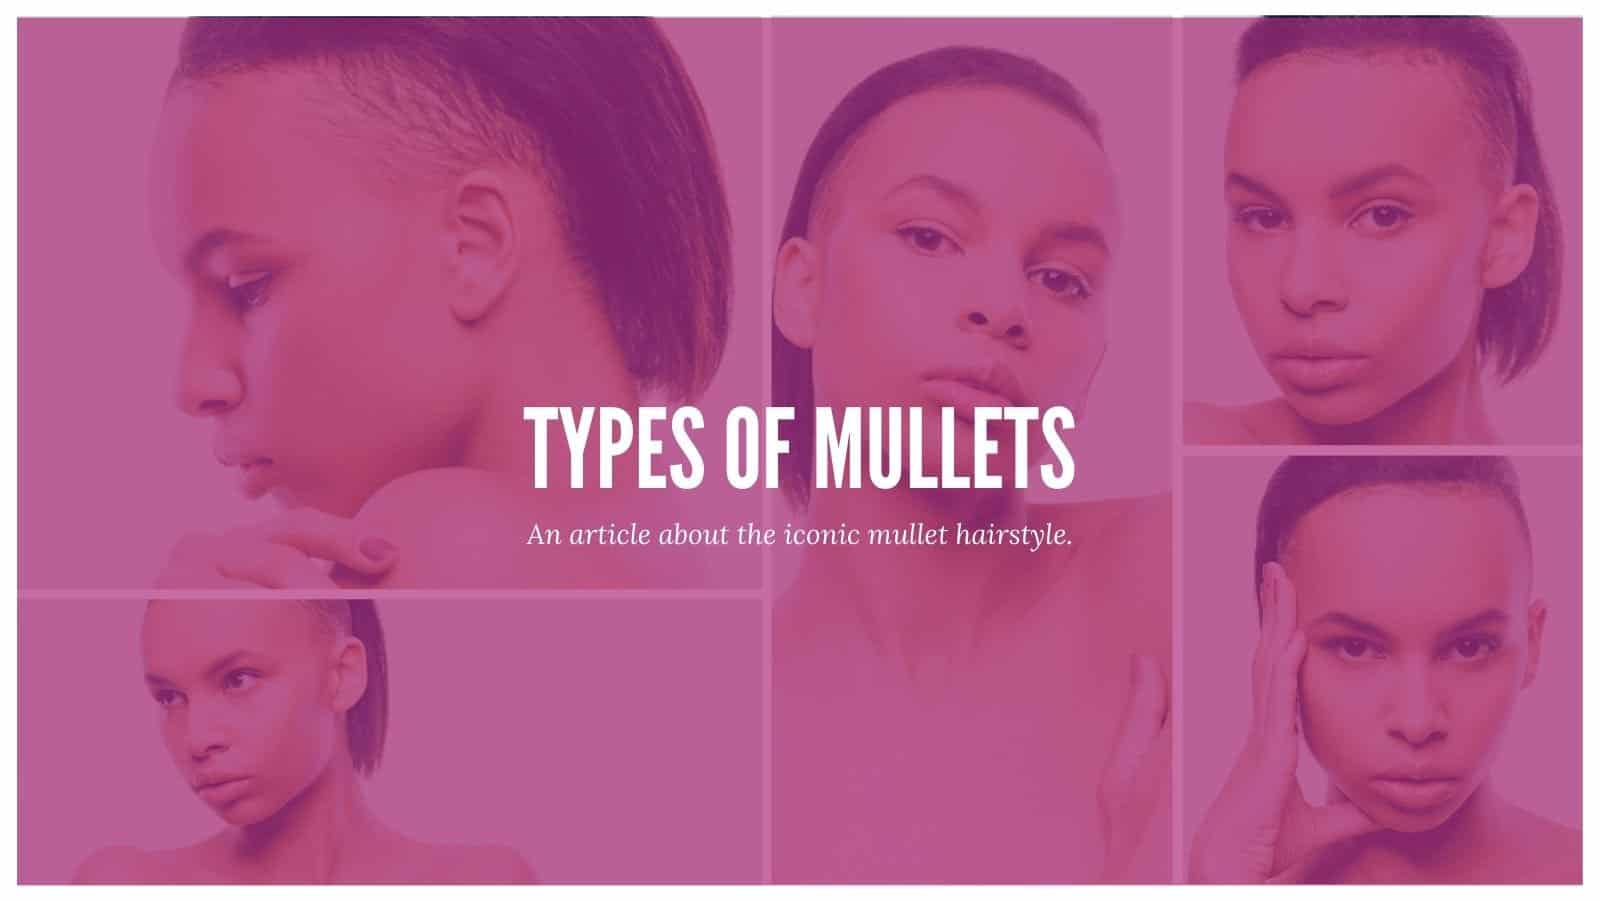 Custom graphic for article about mullet haircuts, including the curly mullet, faux hawk mullet, short mullet, and several other mullet haircuts for men and women. 